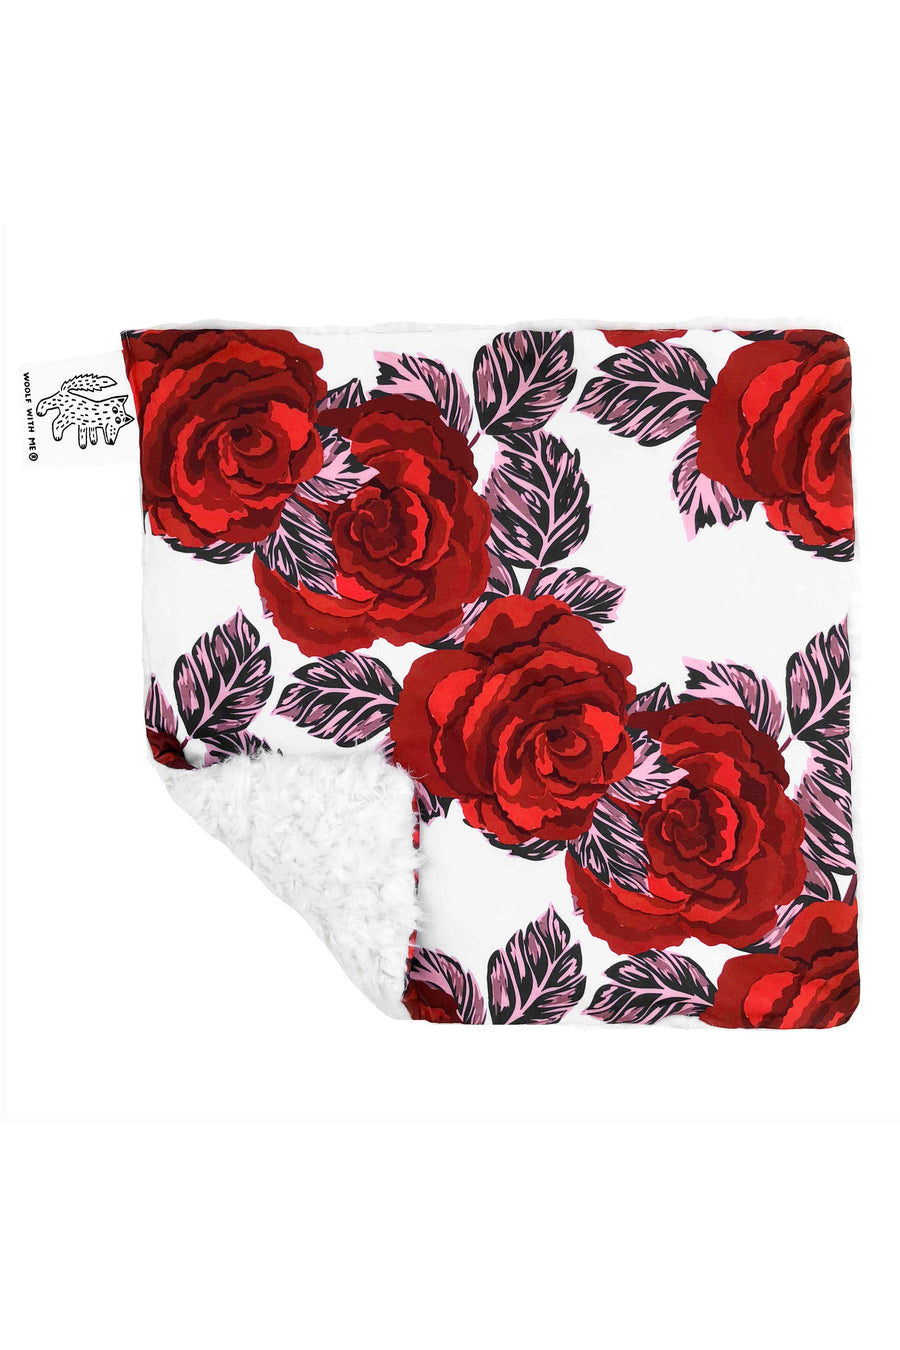 Lovey, Security Blanket 70's Roses // Same Day Shipping!